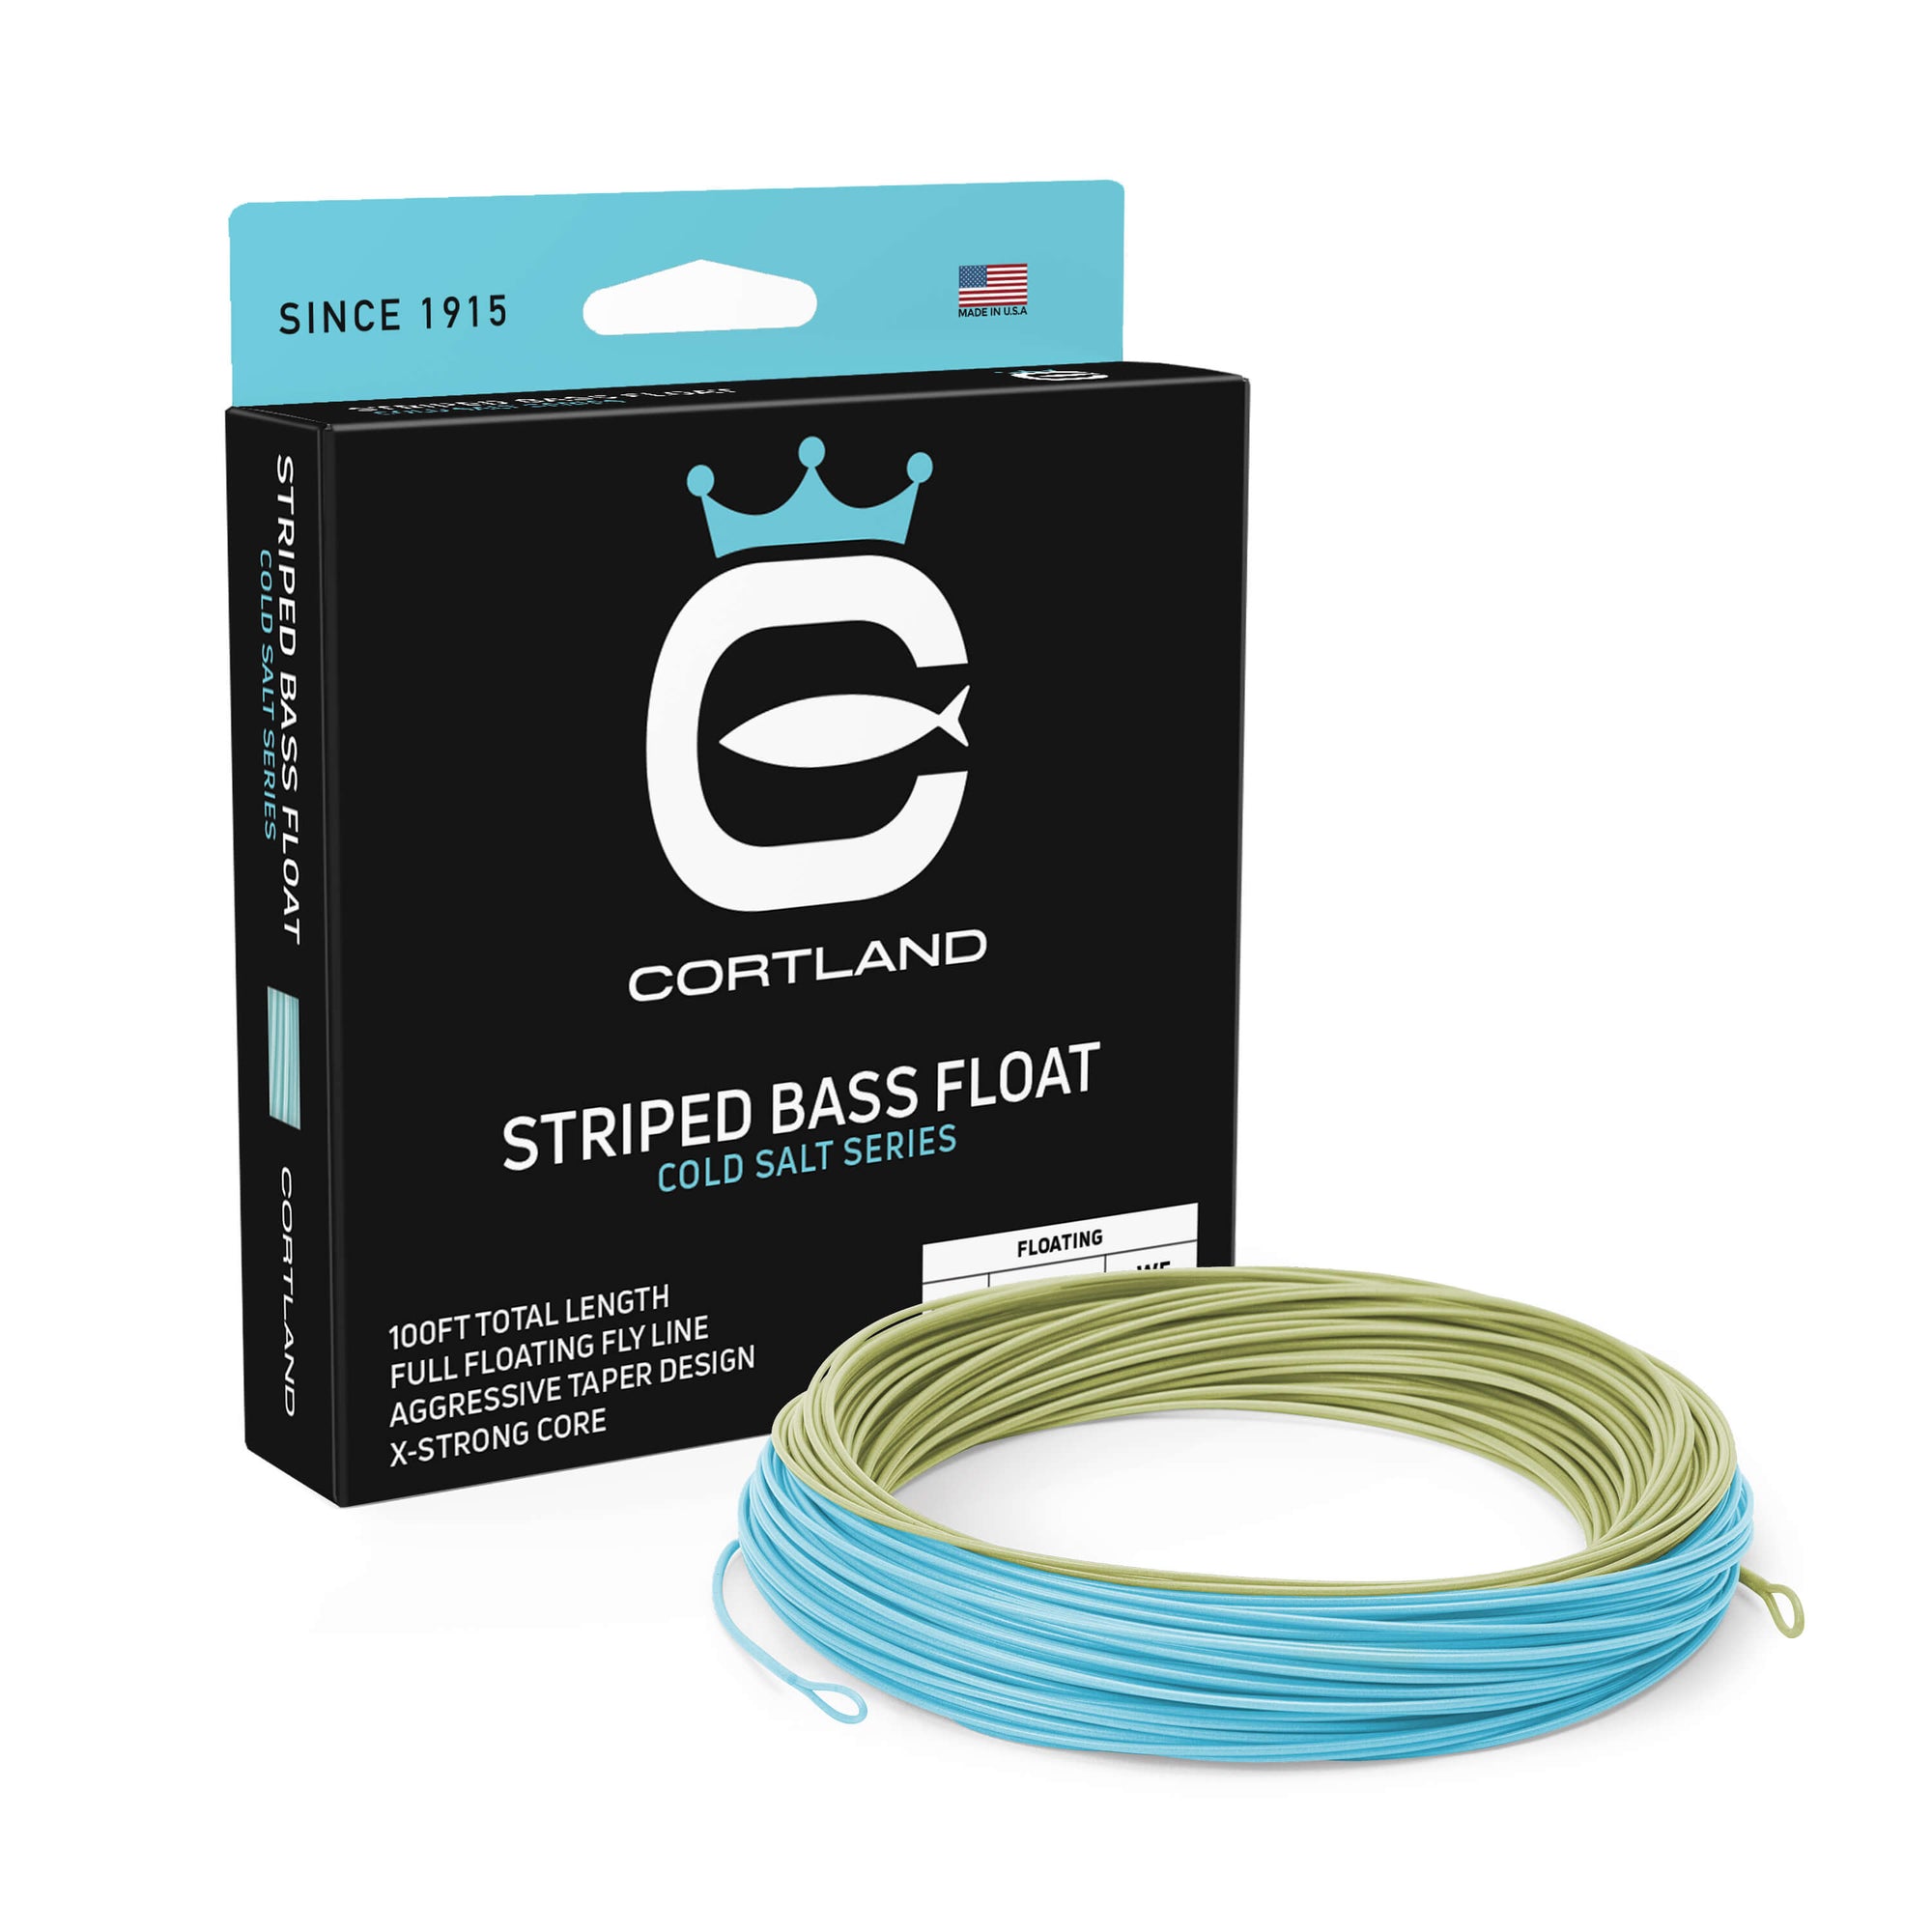 Striped Bass Fly Fishing Line and Box. The line is aqua green and sky blue. The box is black and light blue at the top. 